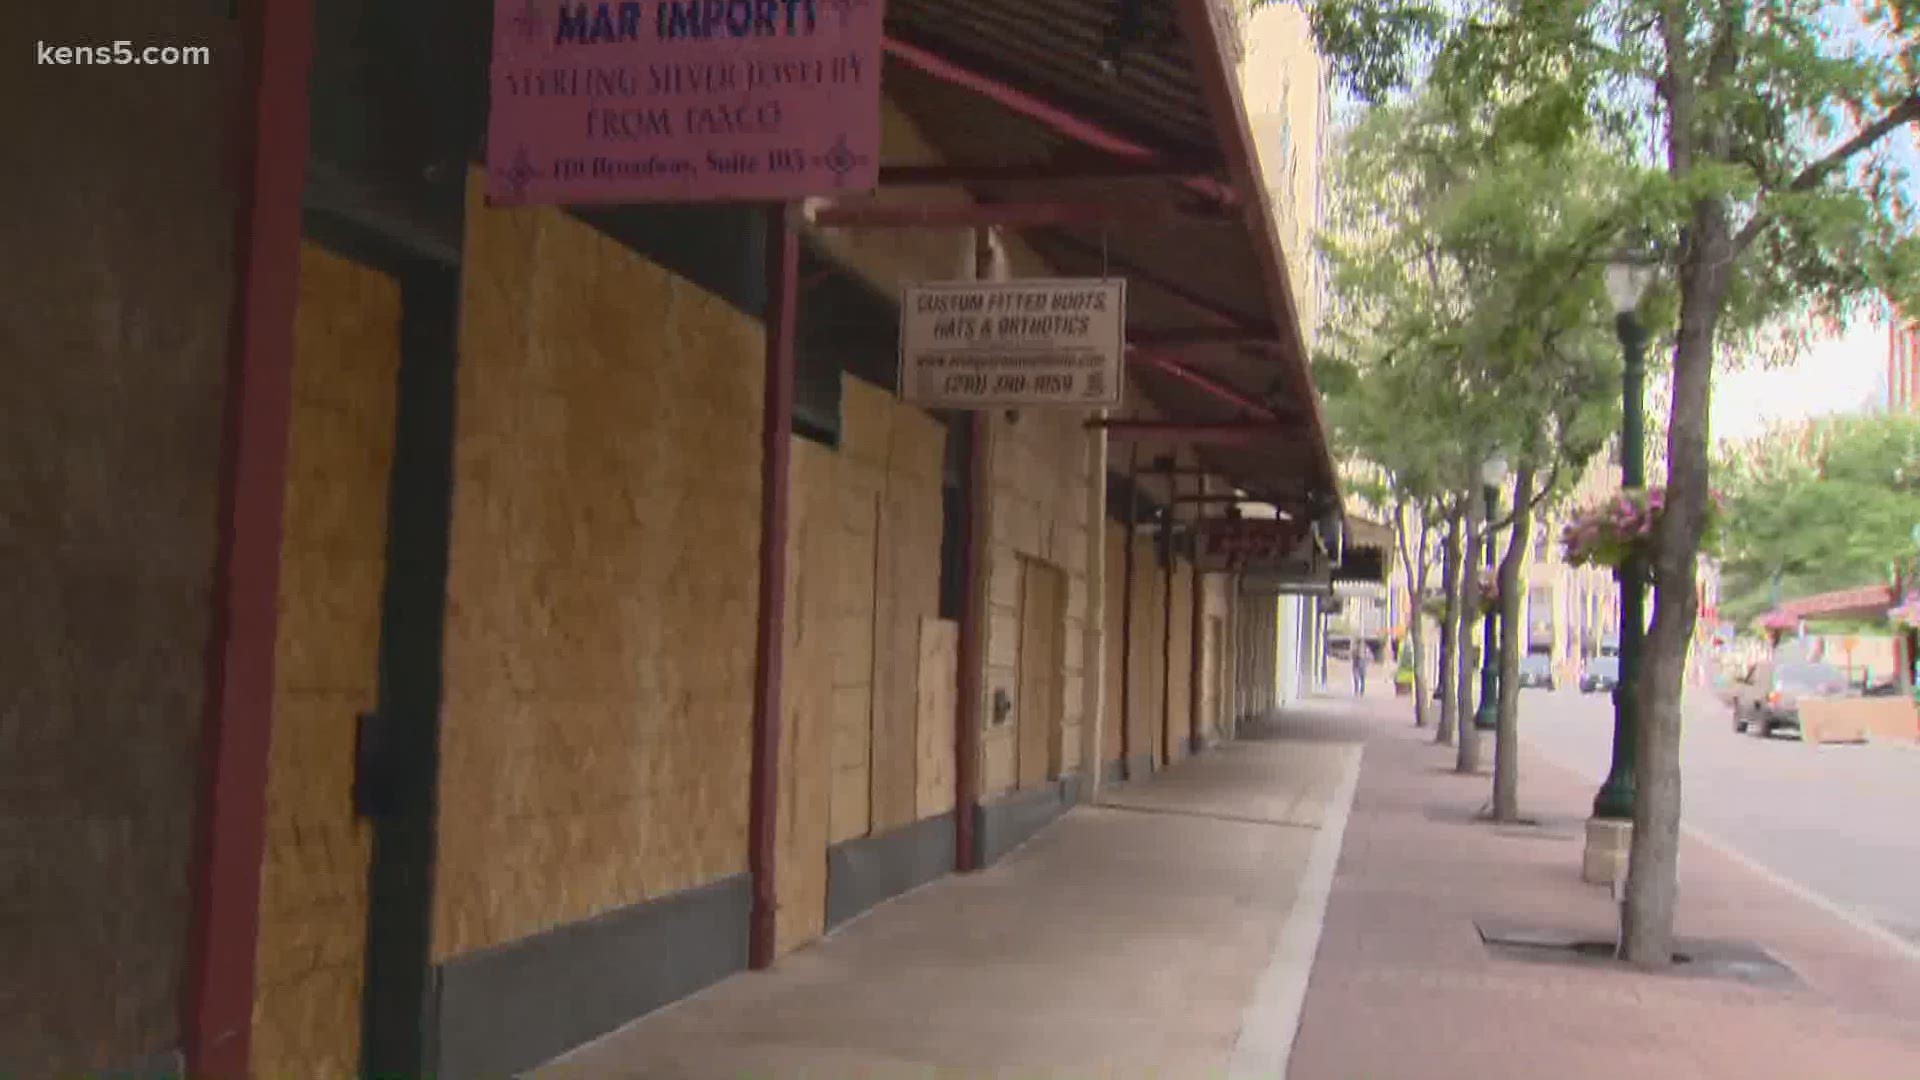 At least 39 businesses were damaged in downtown San Antonio Saturday night, and SAPD will clear the public out of Alamo Plaza ahead of a curfew Sunday night.